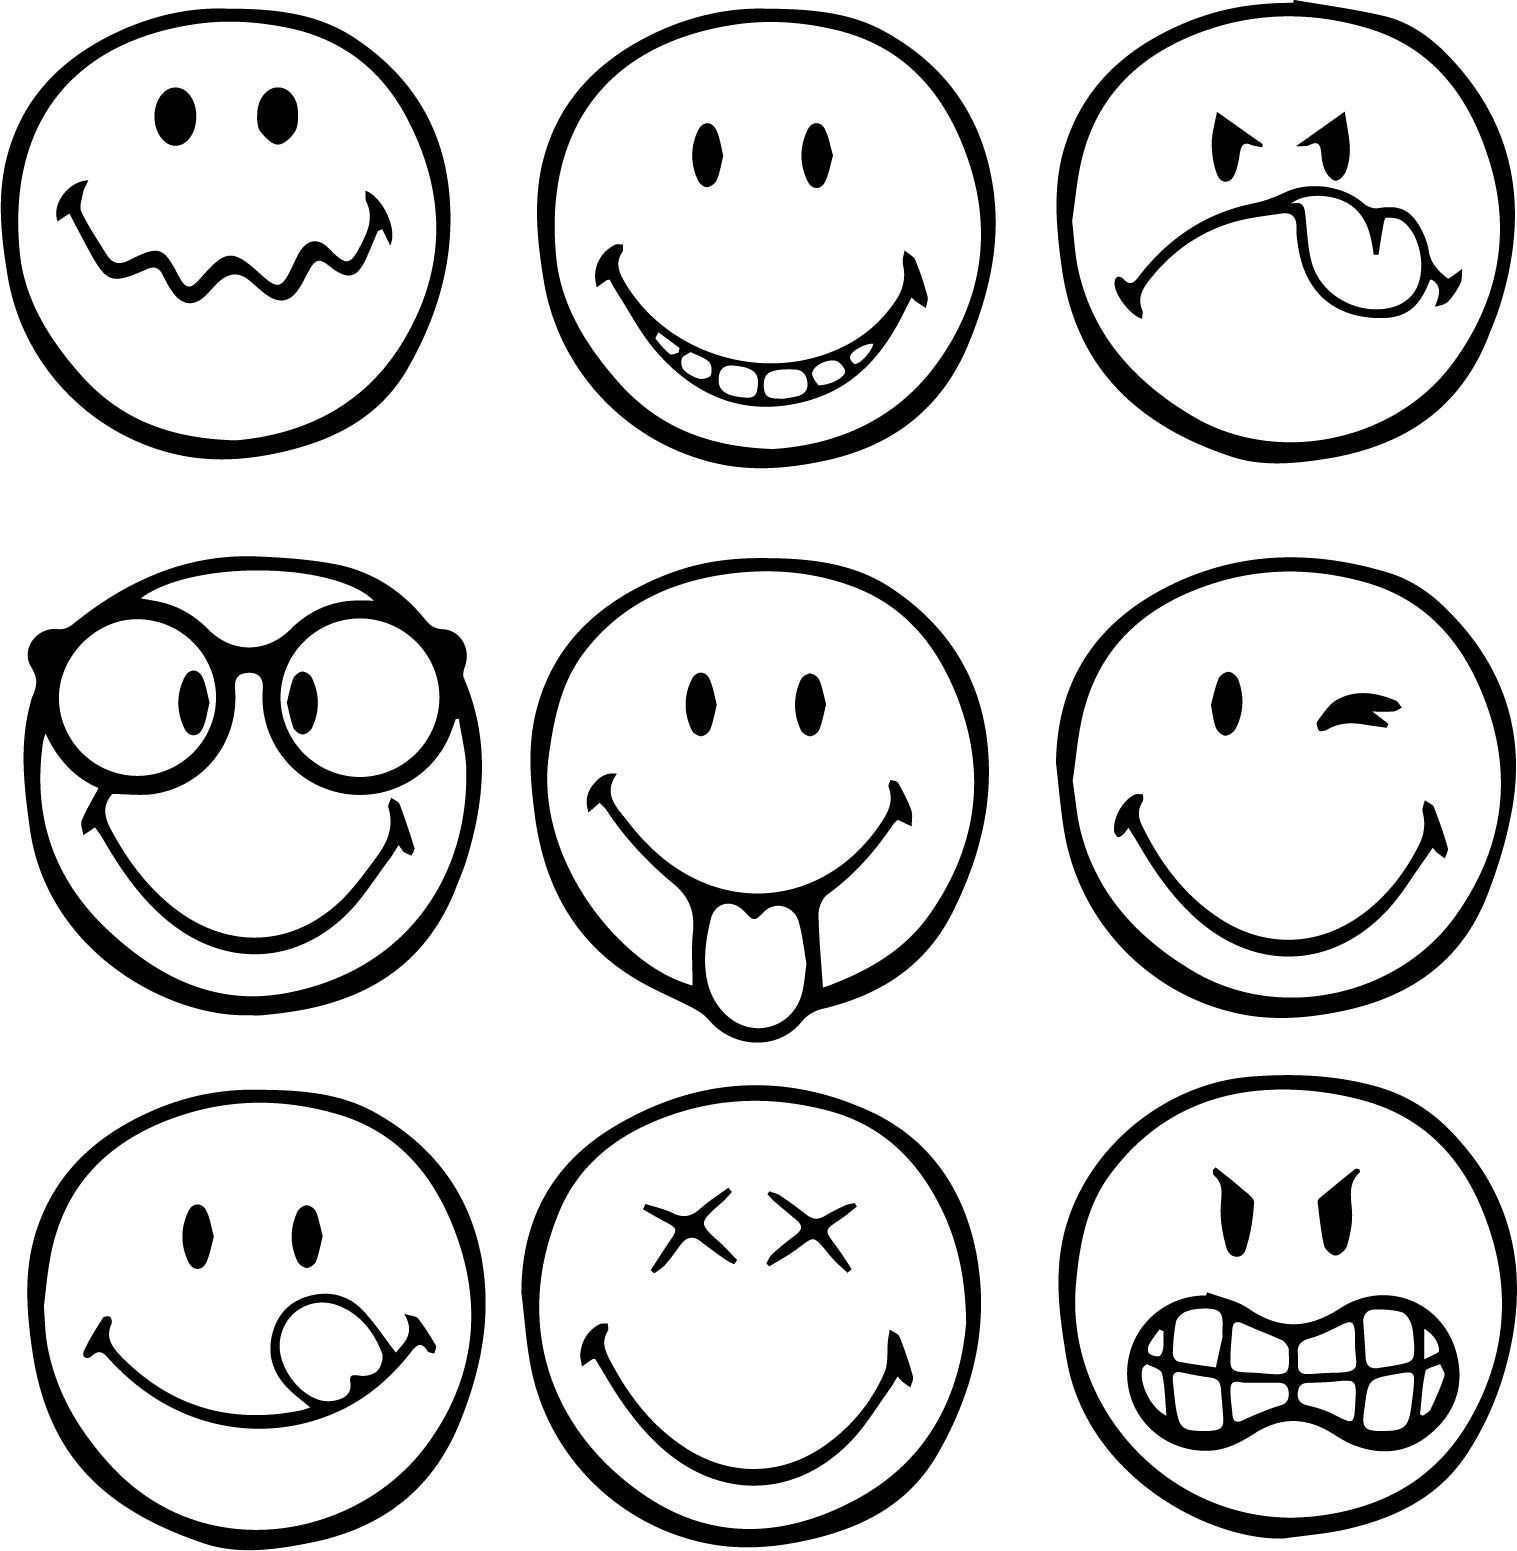 Nice First Graphical Emoticons Smiley Coloring Page Mini Drawings Art Drawings For Ki